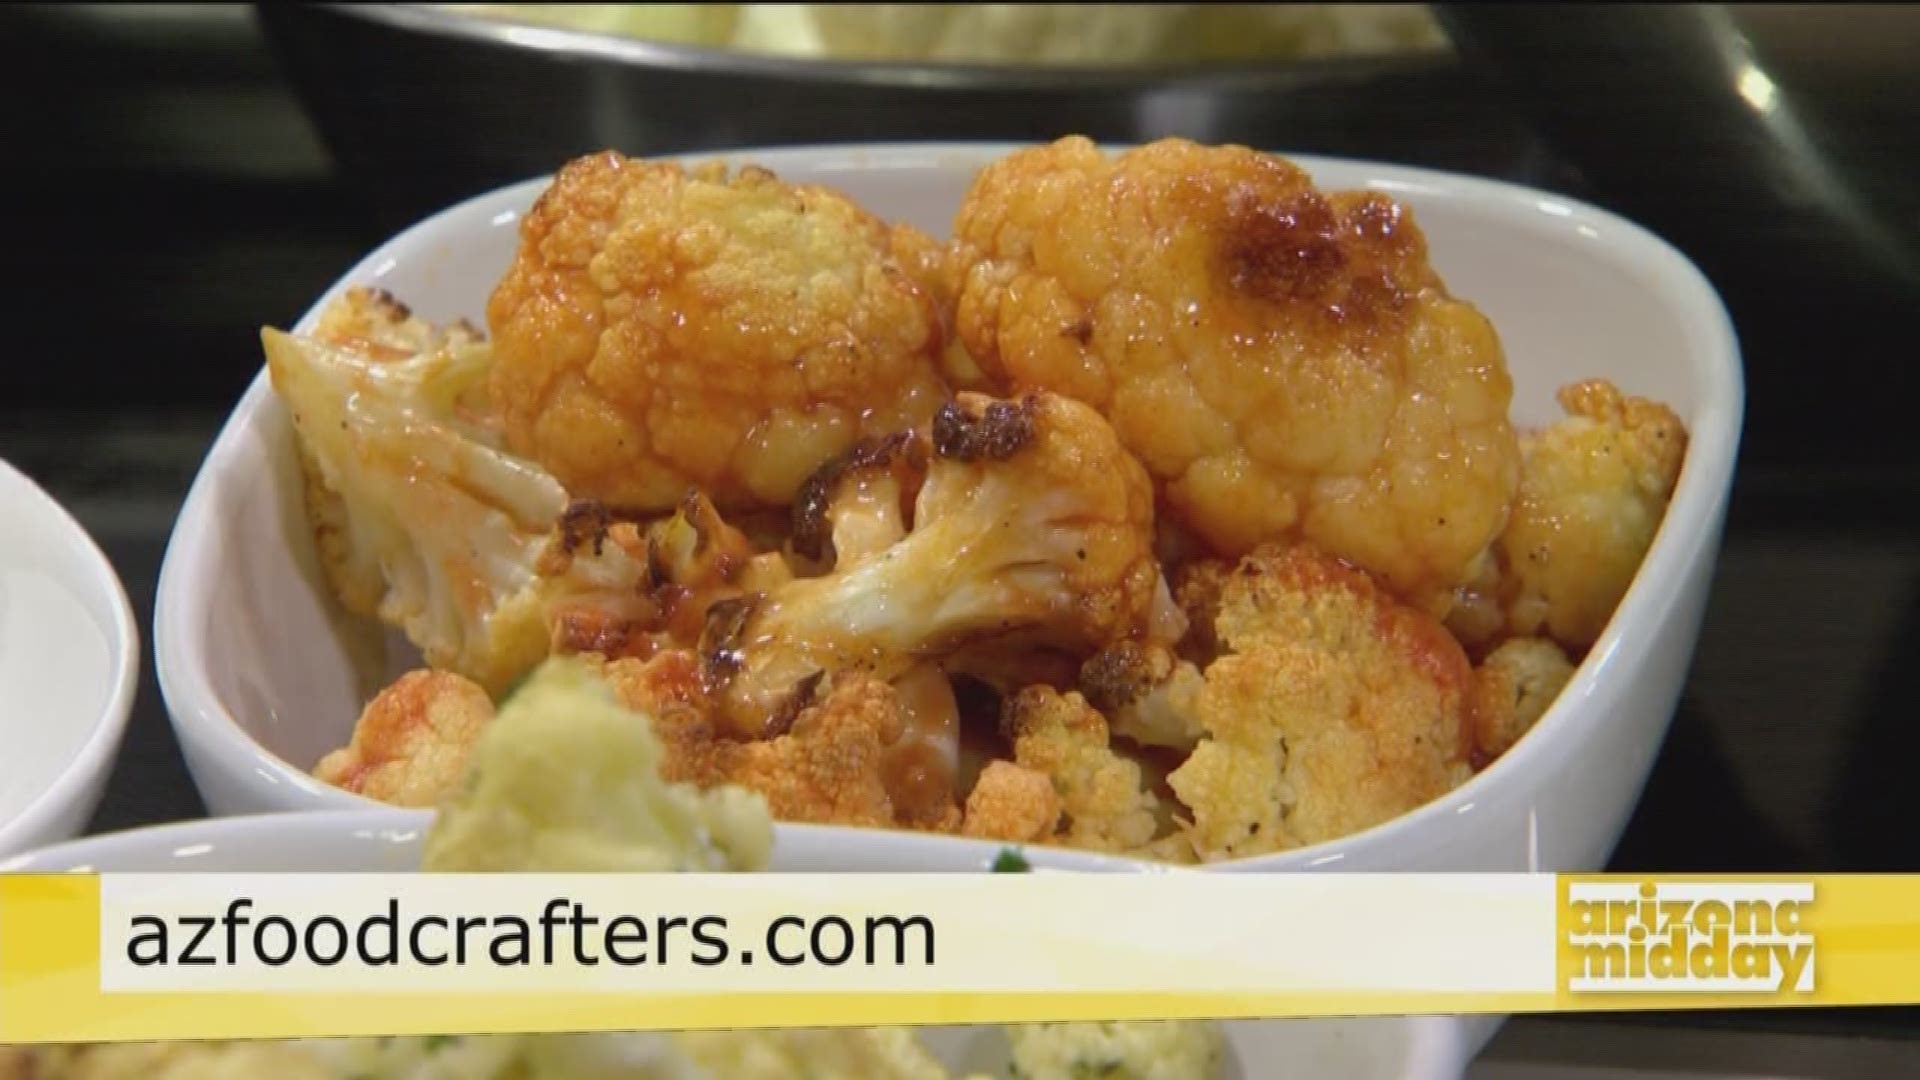 Chef Eddie Caliendo shows us how to create delicious & nutritious game day buffalo wing & garlic cauliflower snacks